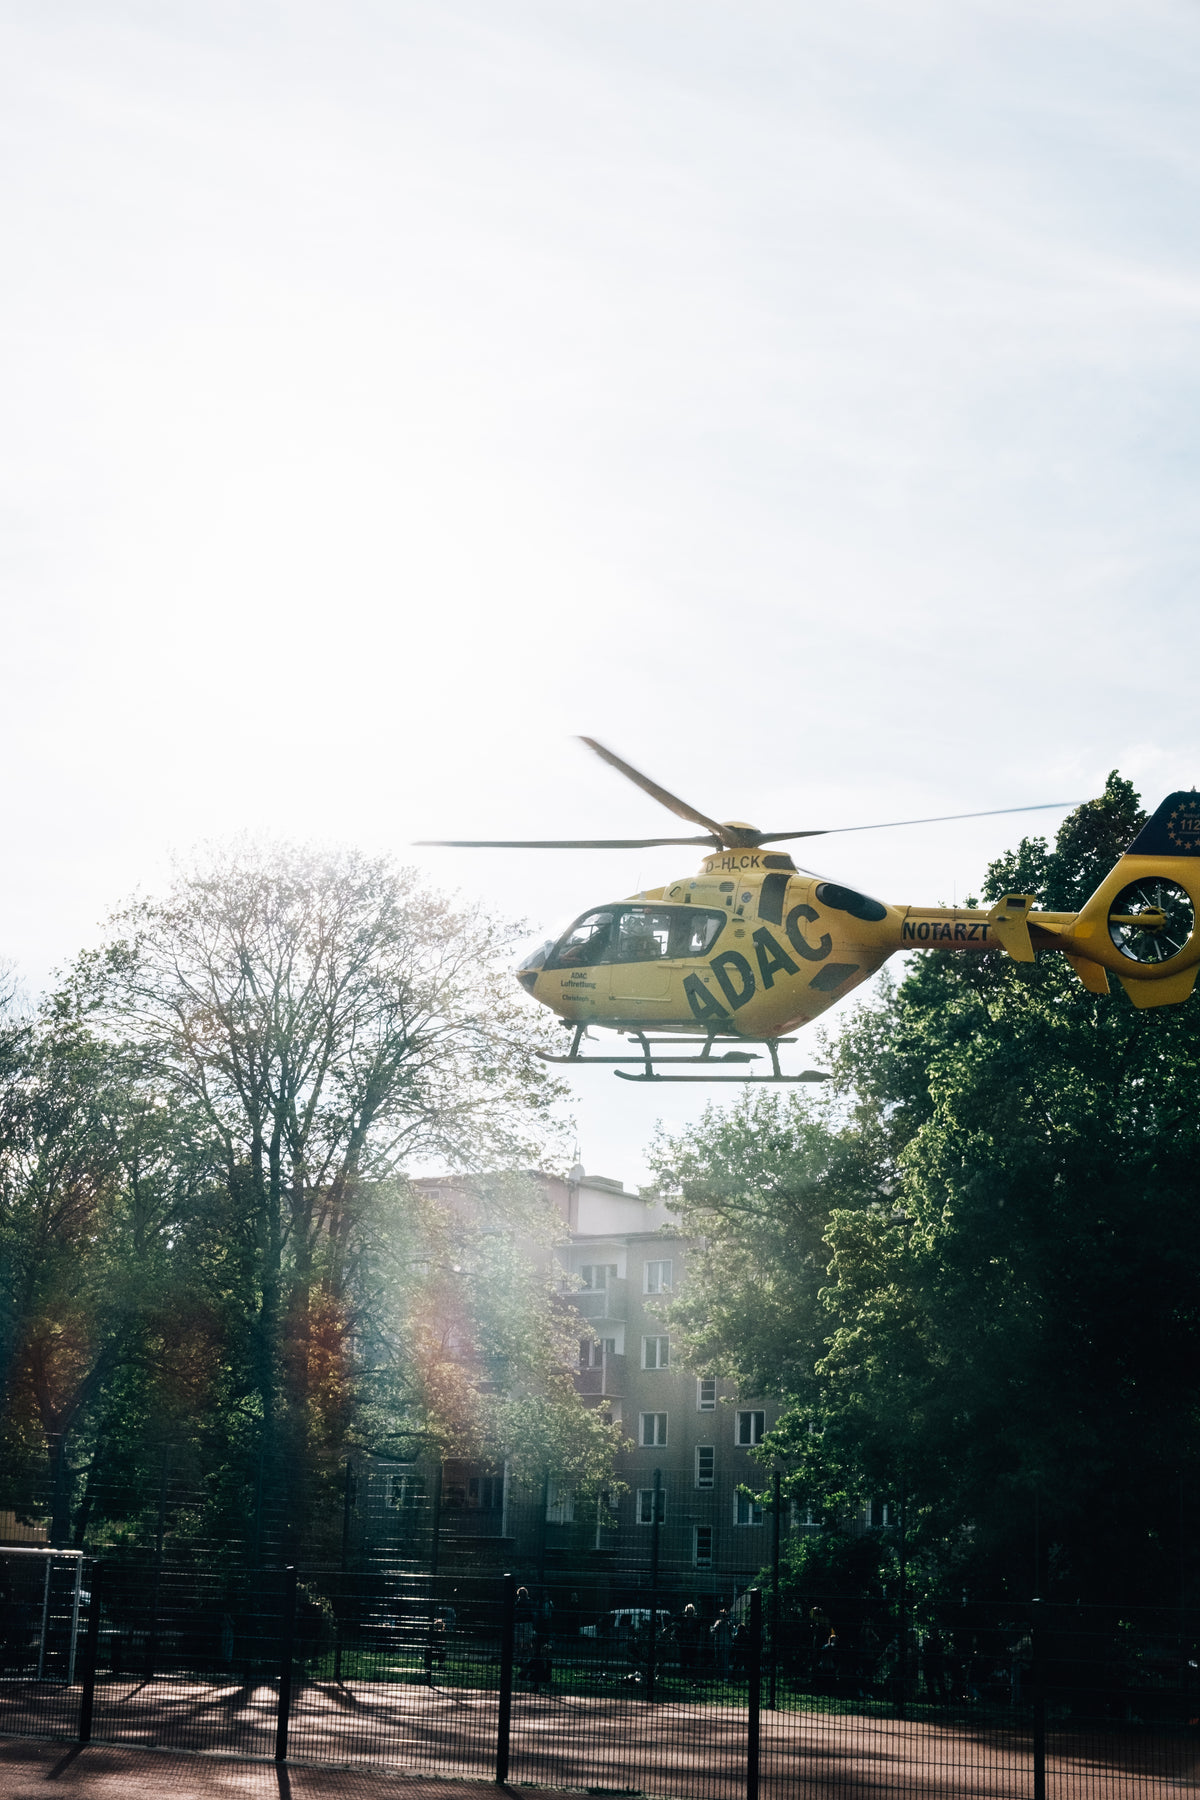 yellow helicopter lands in town